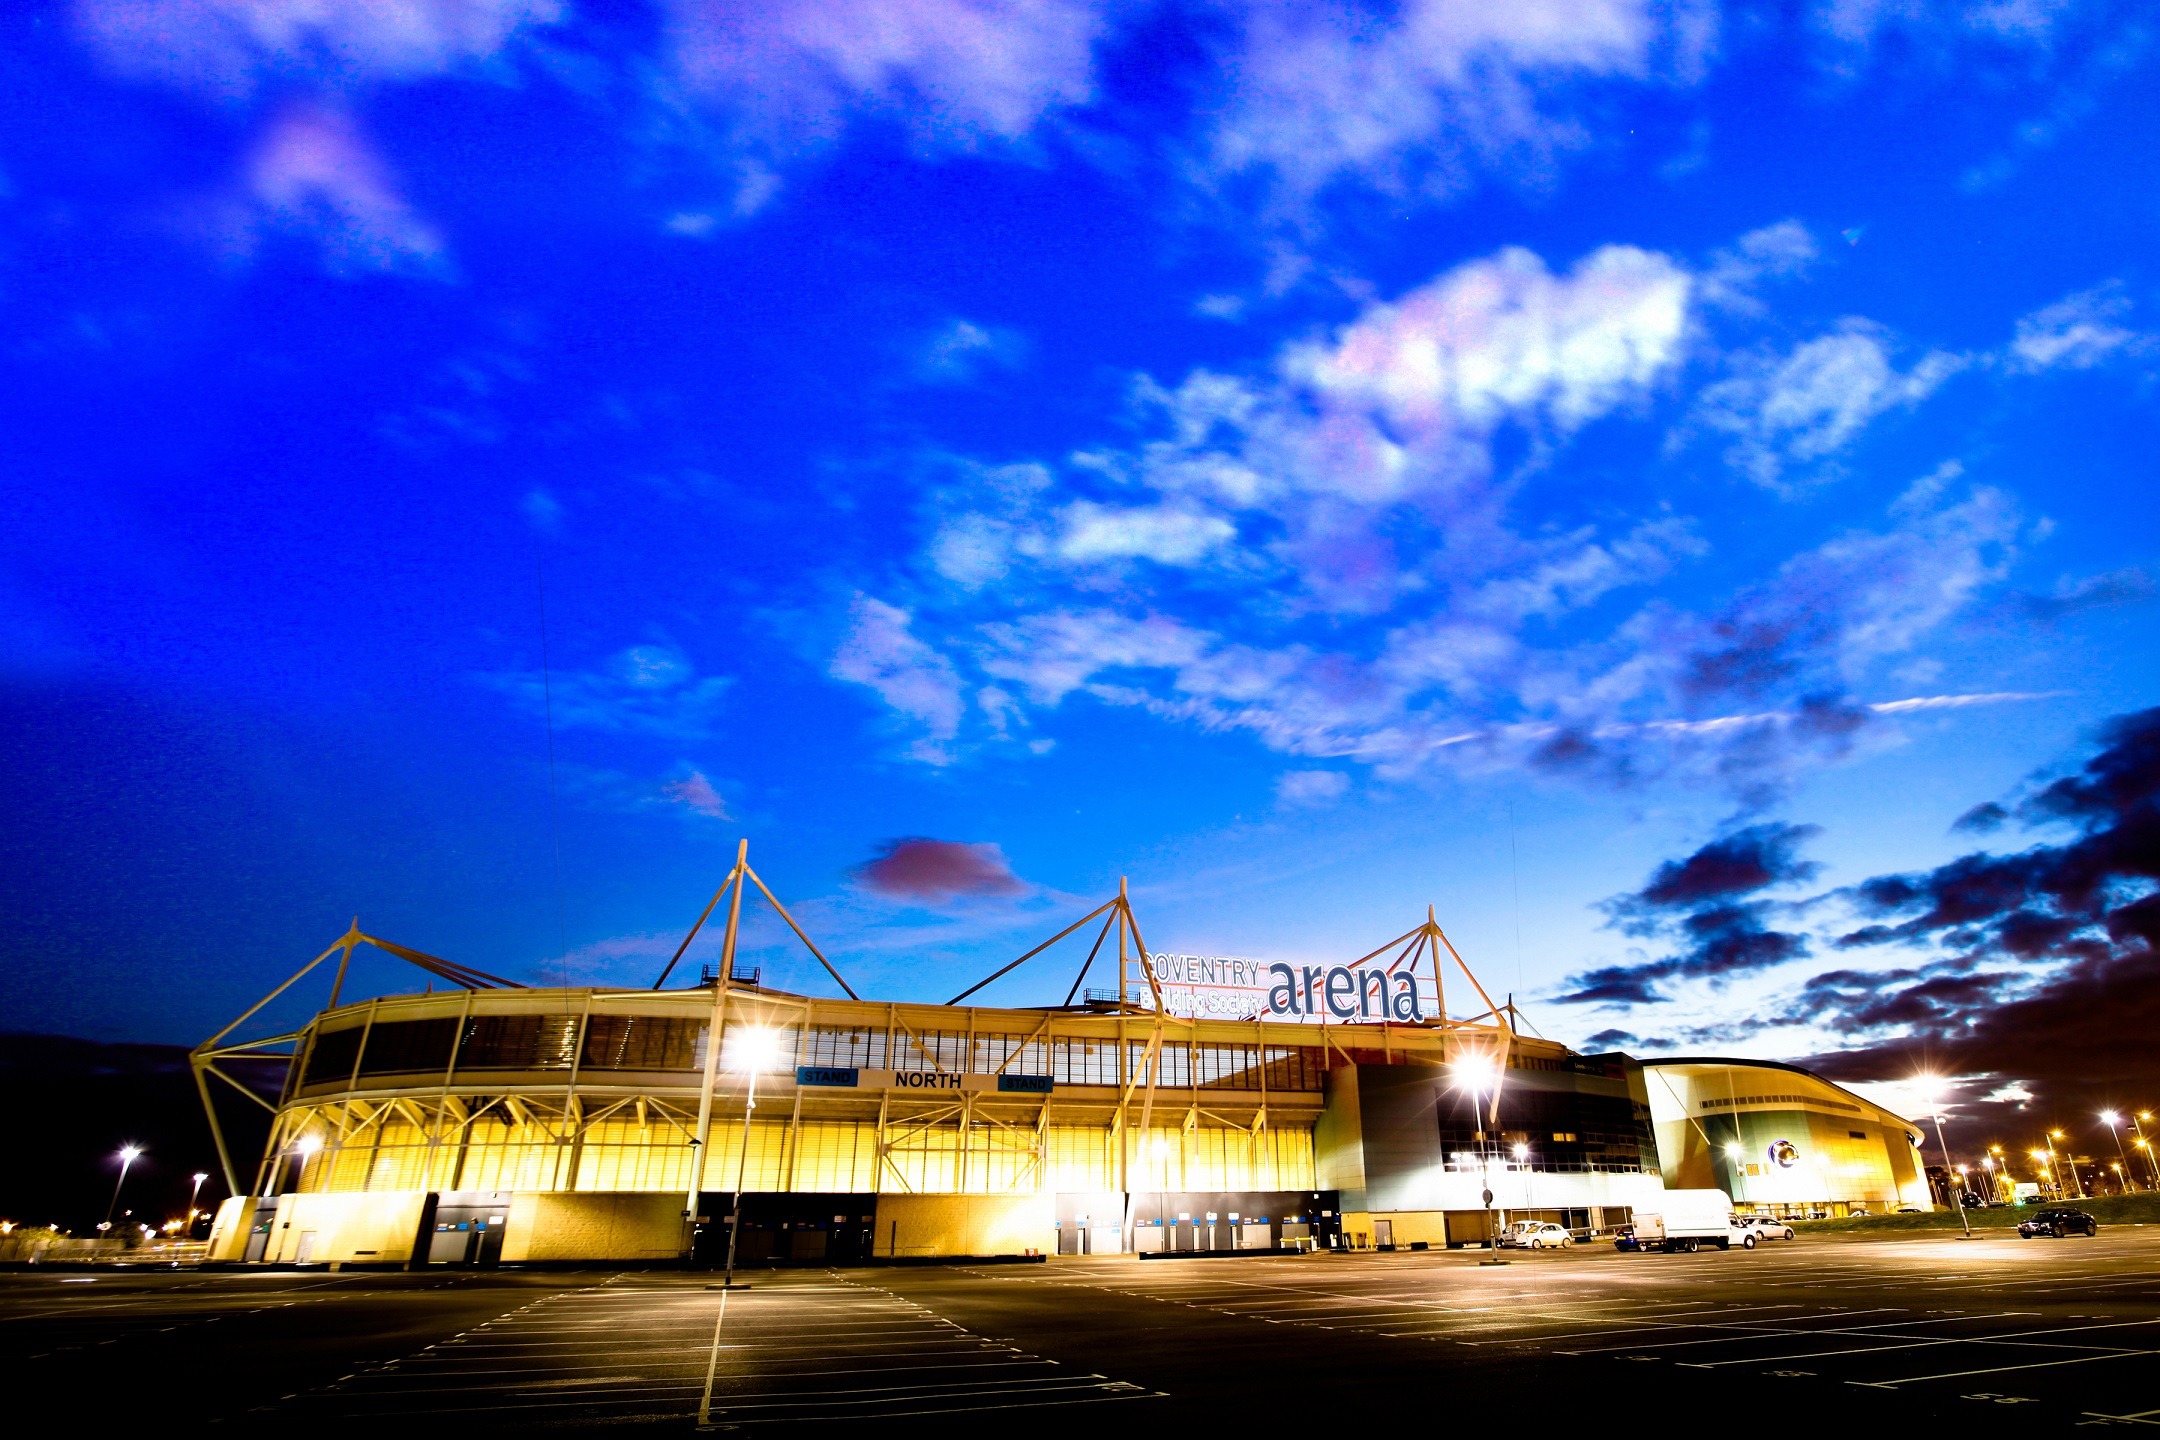 Coventry Building Society Arena shortlisted for trio of major awards